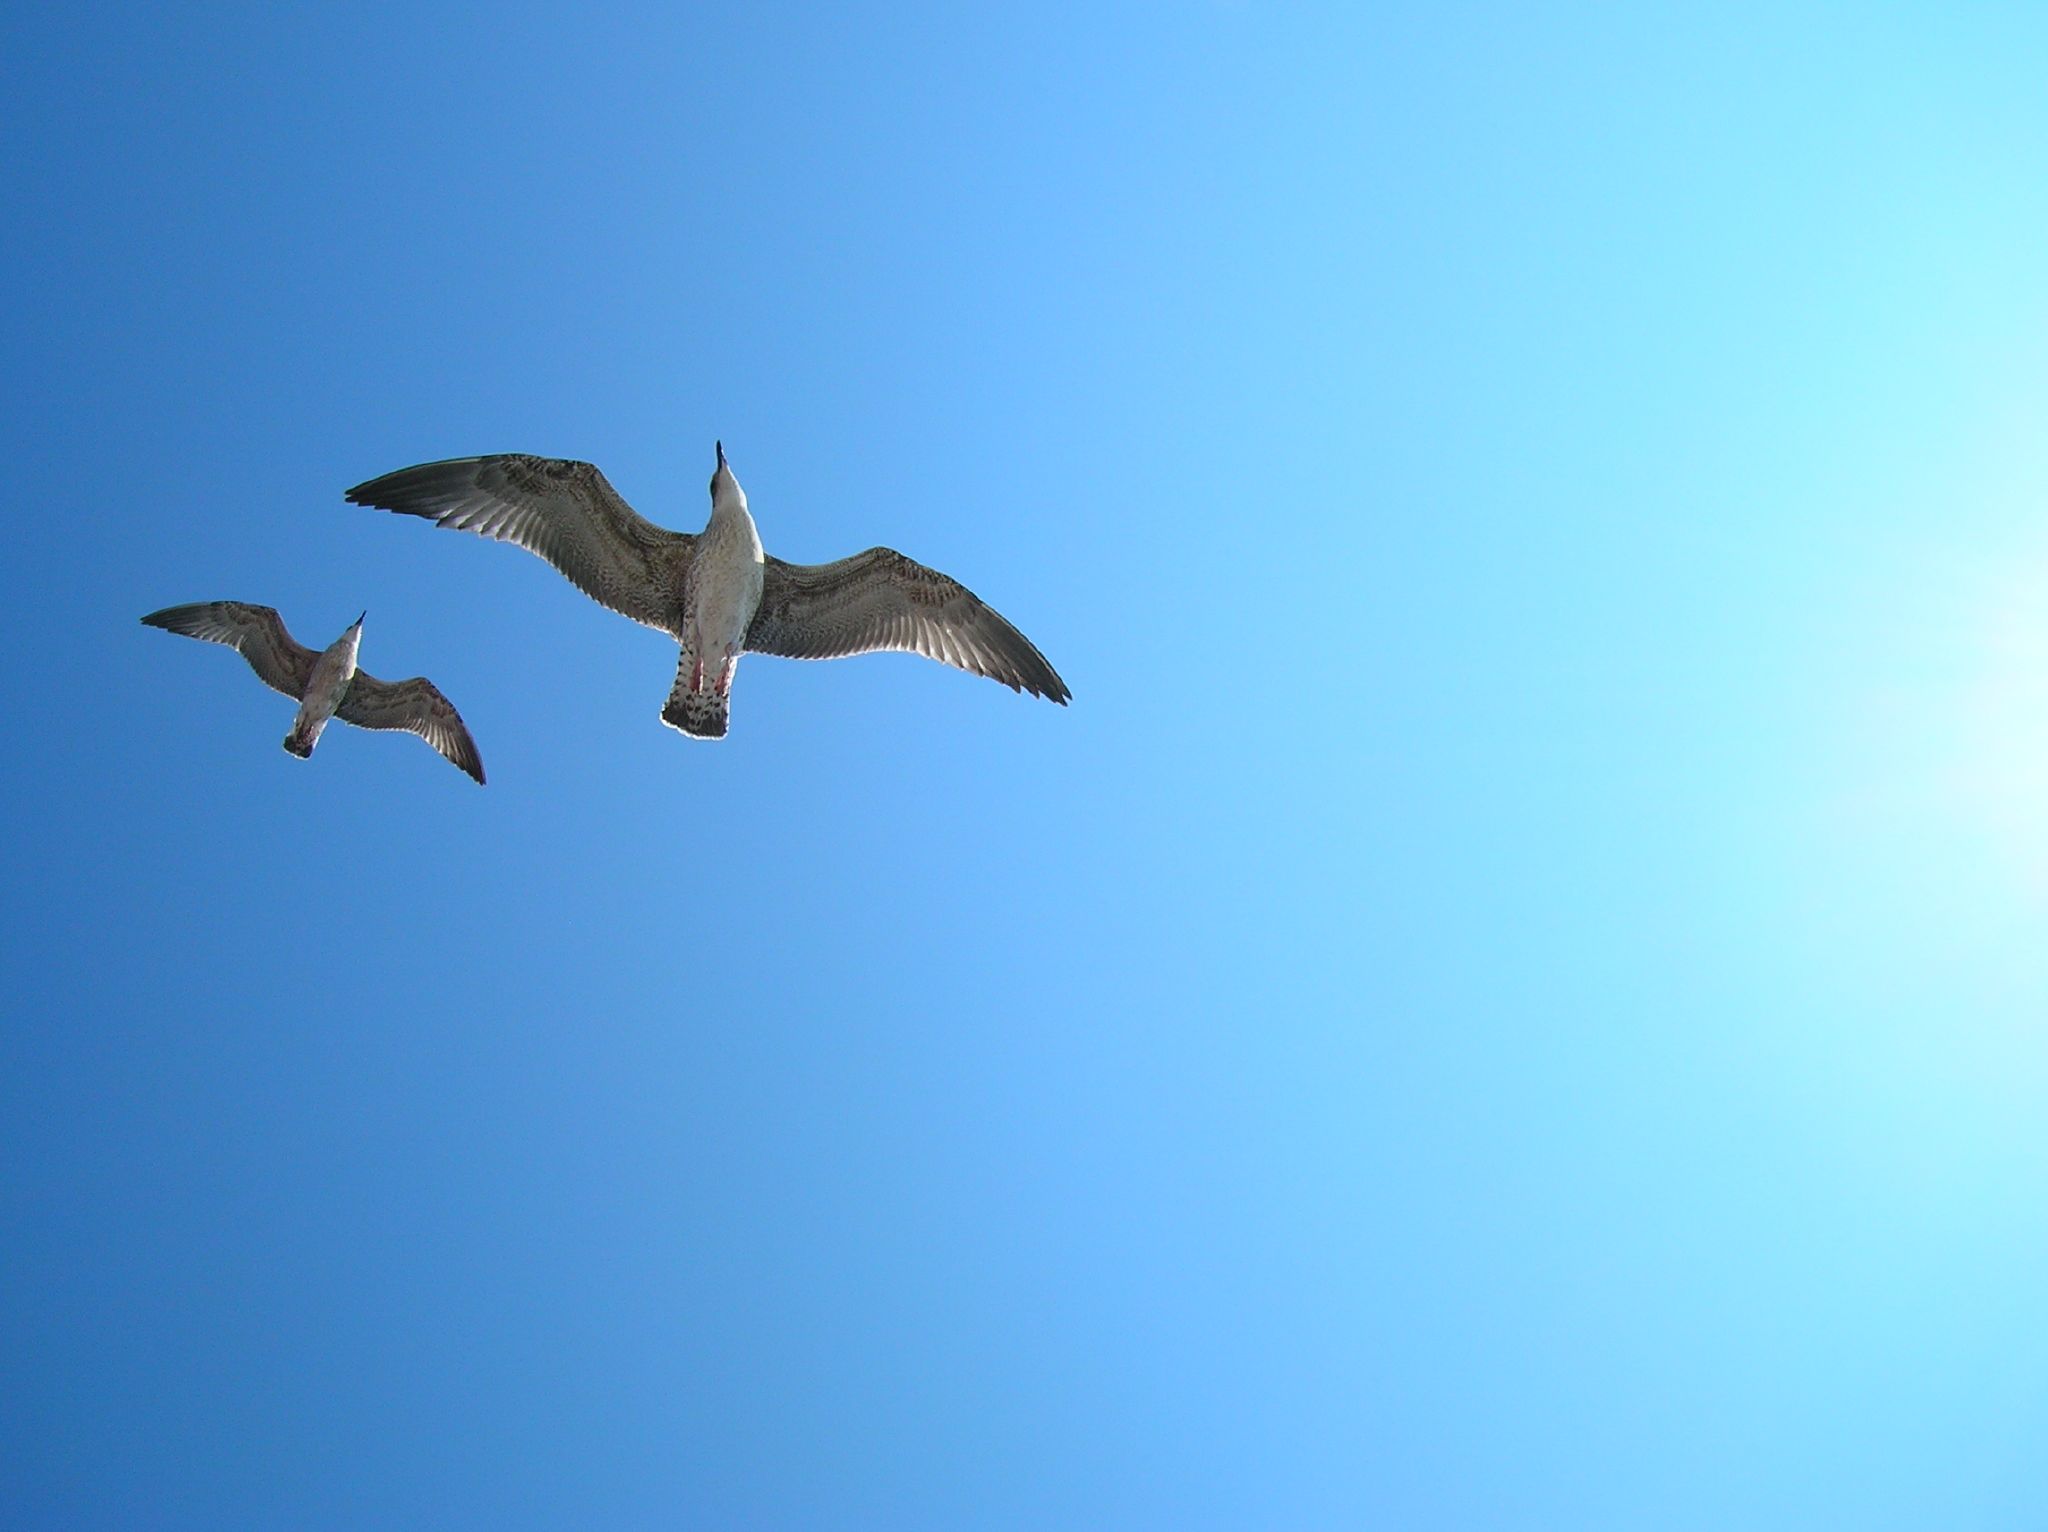 three birds flying through the blue sky while in midair